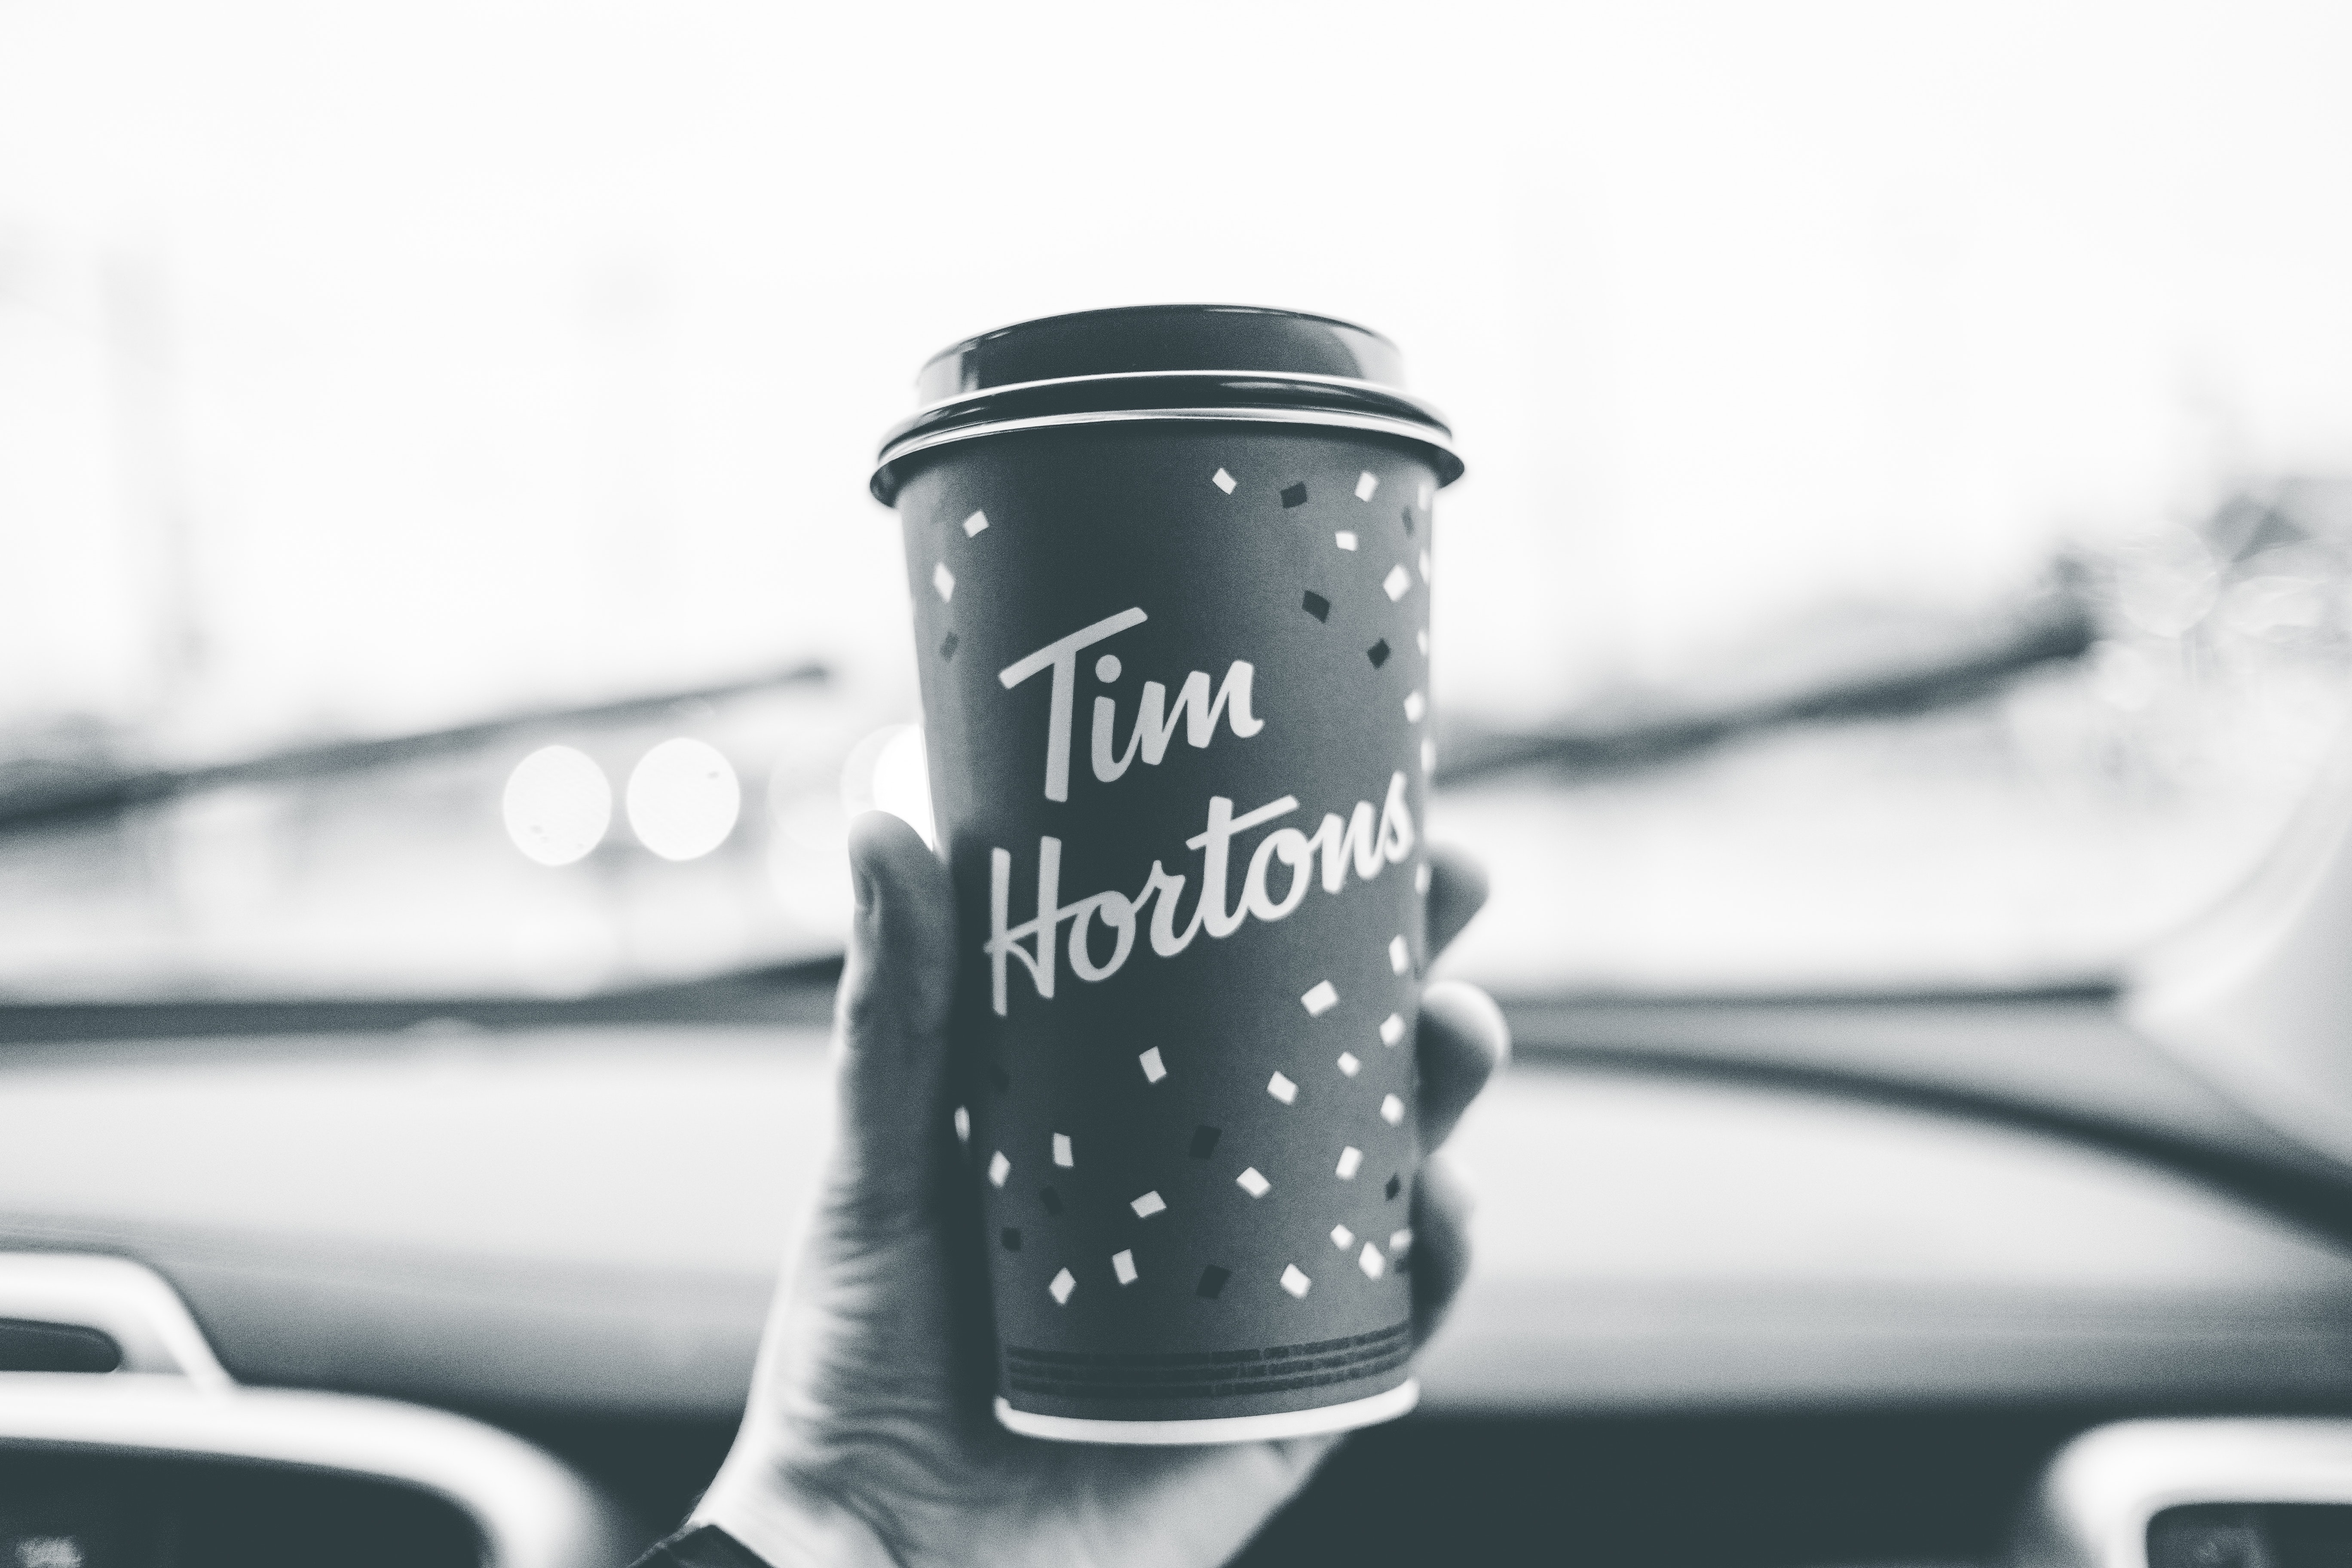 A cup of coffee from Tim Hortons | Source: Pexels